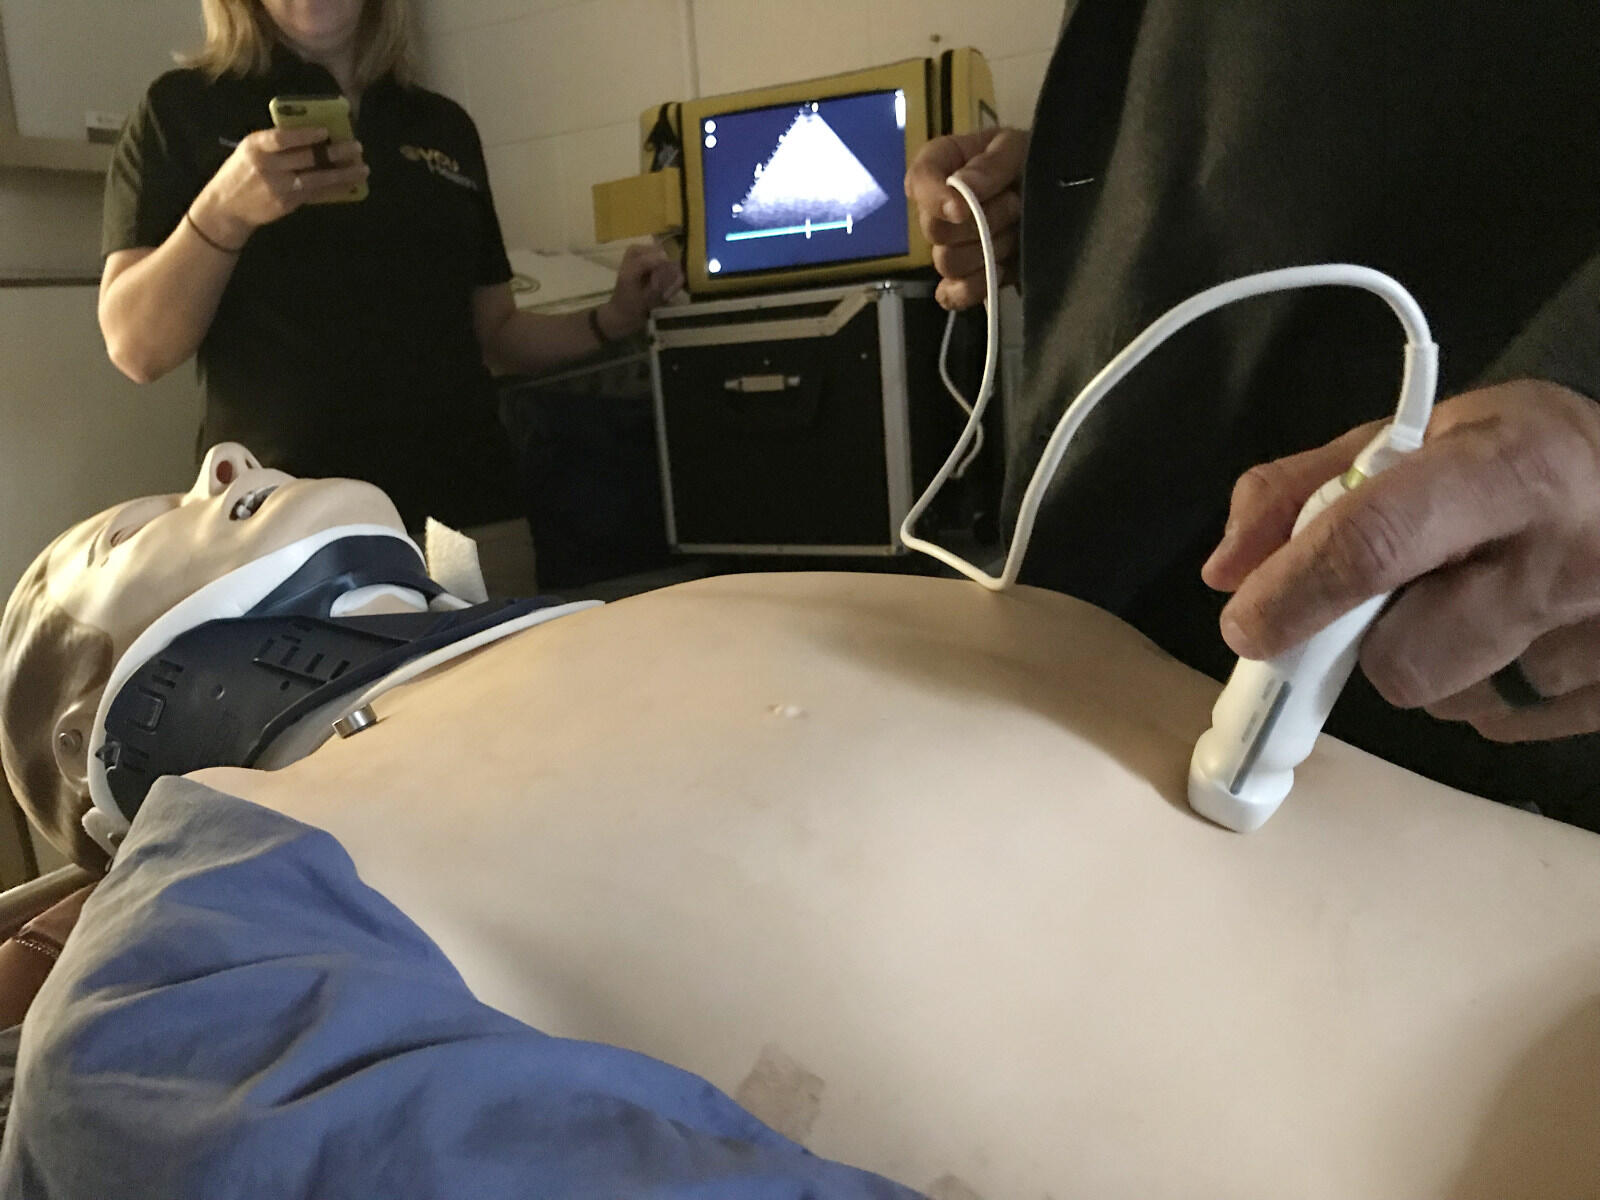 Jason Welch, M.D., an EMS physician and medical director for Operational Medicine Consultants, uses an ultrasound probe as part of a simulated exercise in VCU Health's course on using ultrasound in pre-hospital emergency medical care.